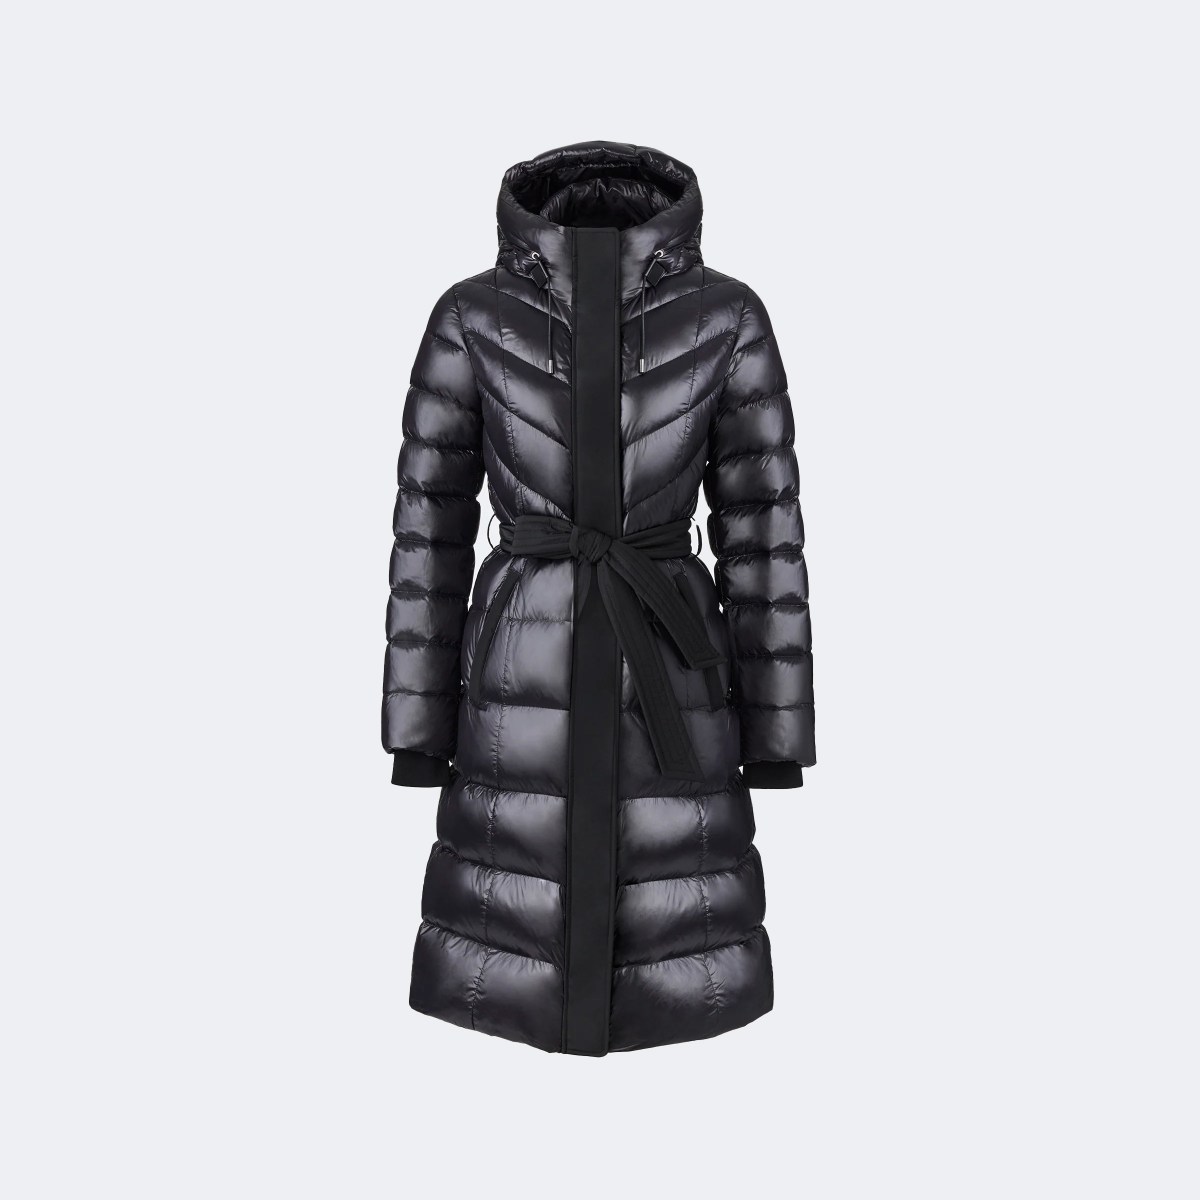 The best and warmest winter coats coats for women in 2023